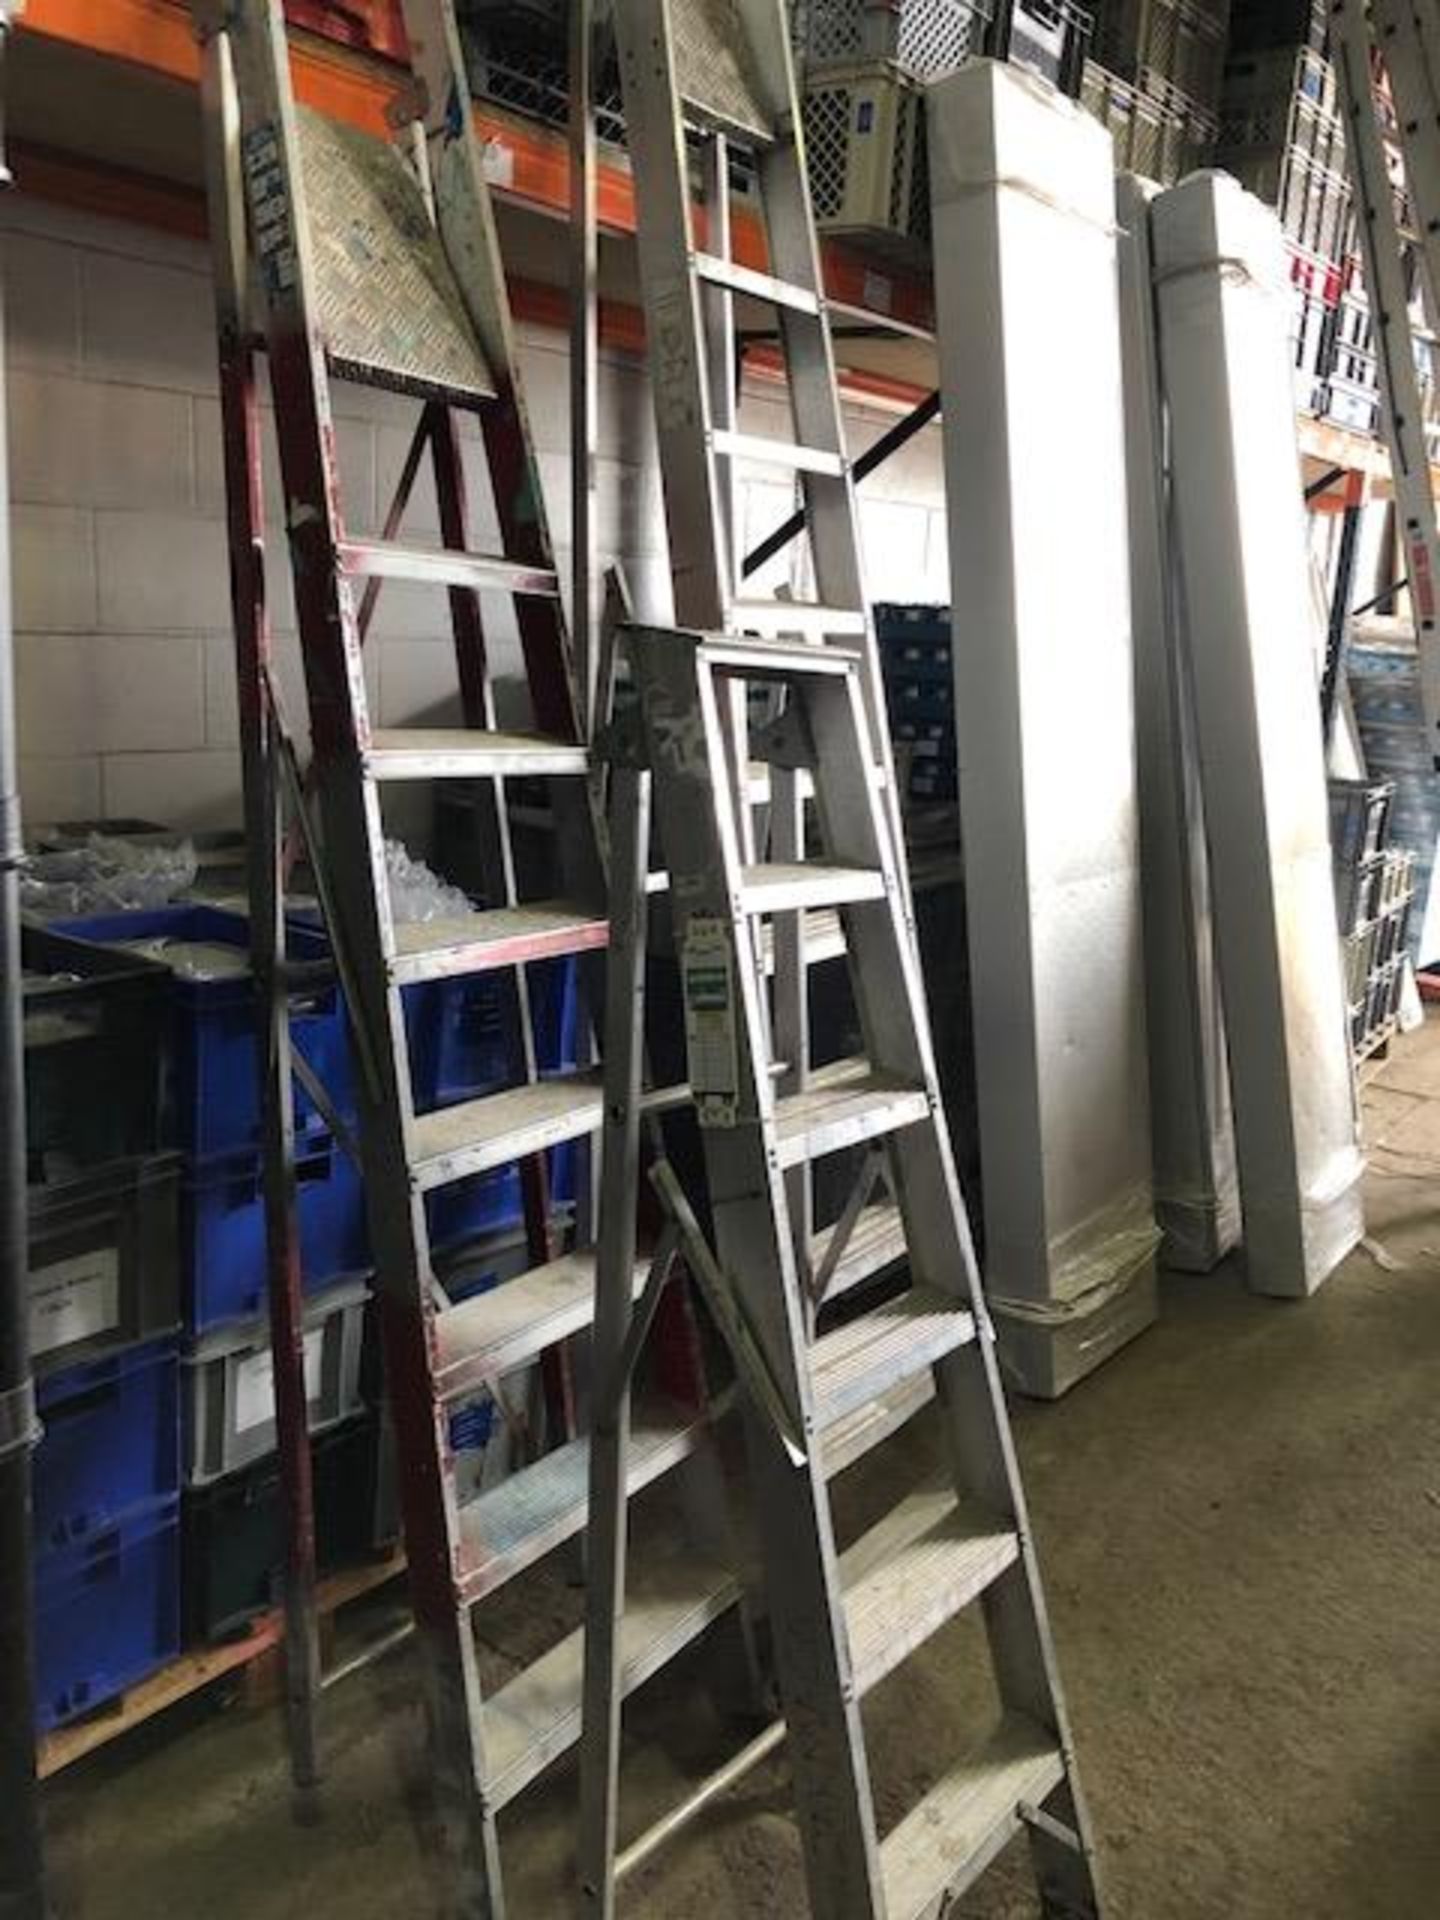 * 3 sets of step ladders